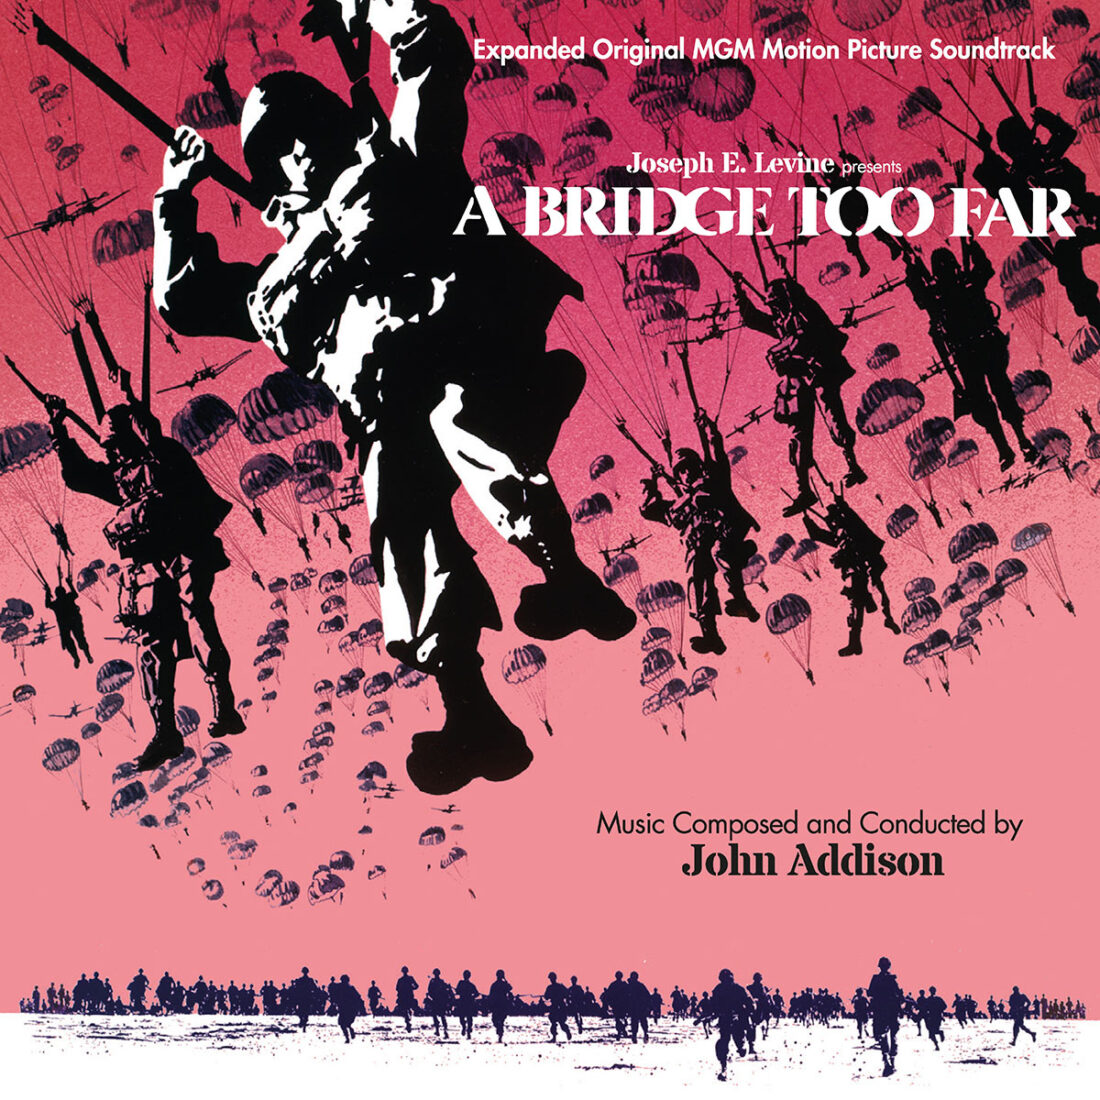 A Bridge Too Far Expanded Original MGM Motion Picture Soundtrack 2-CD Edition Composed by John Addison